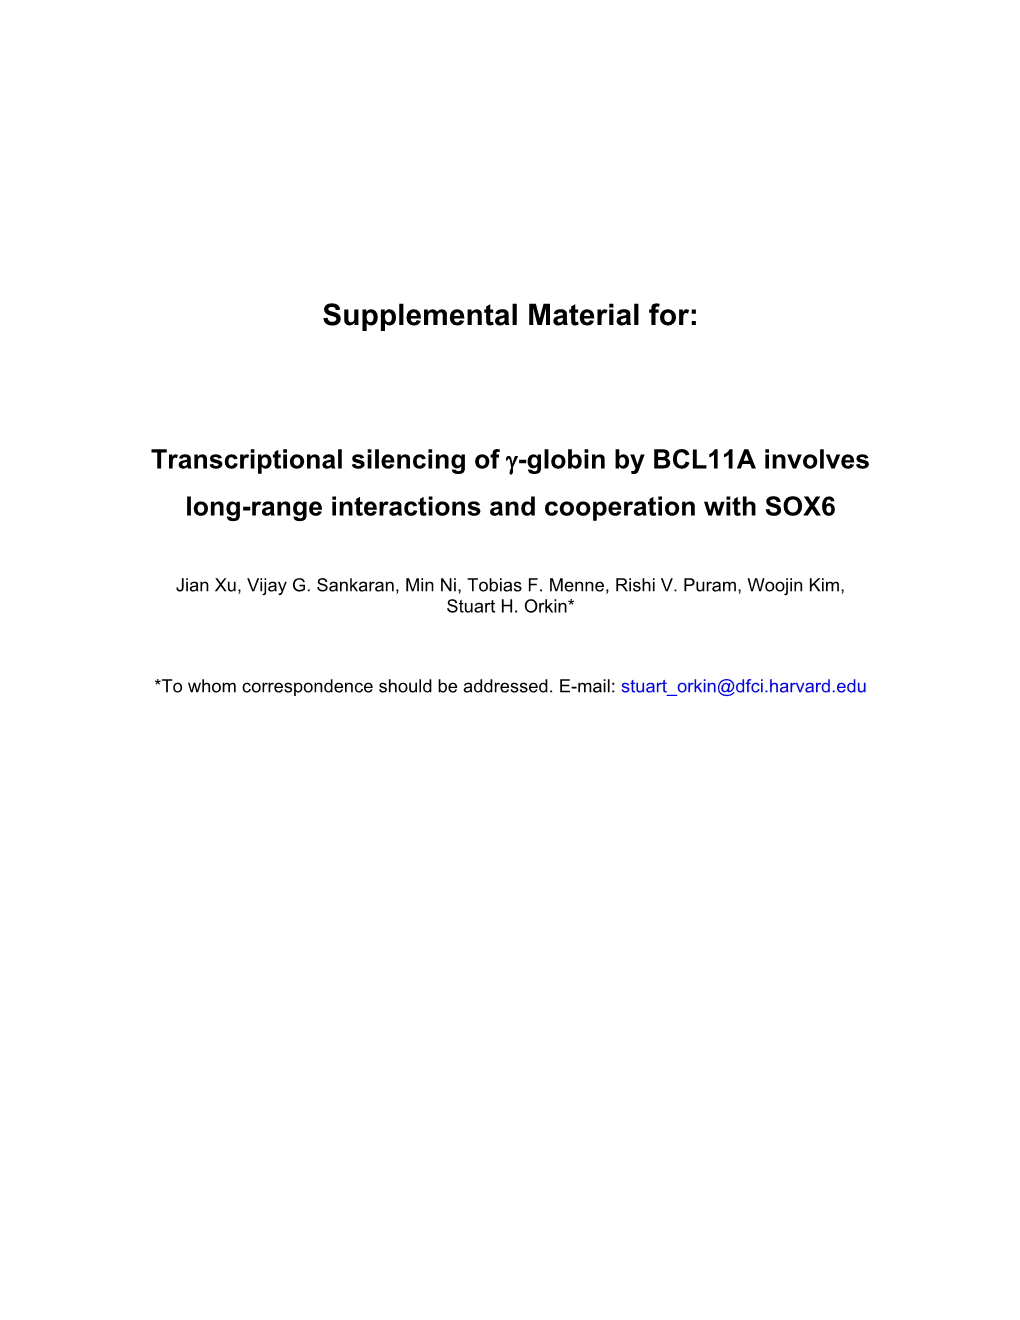 Supplemental Materials and Methods